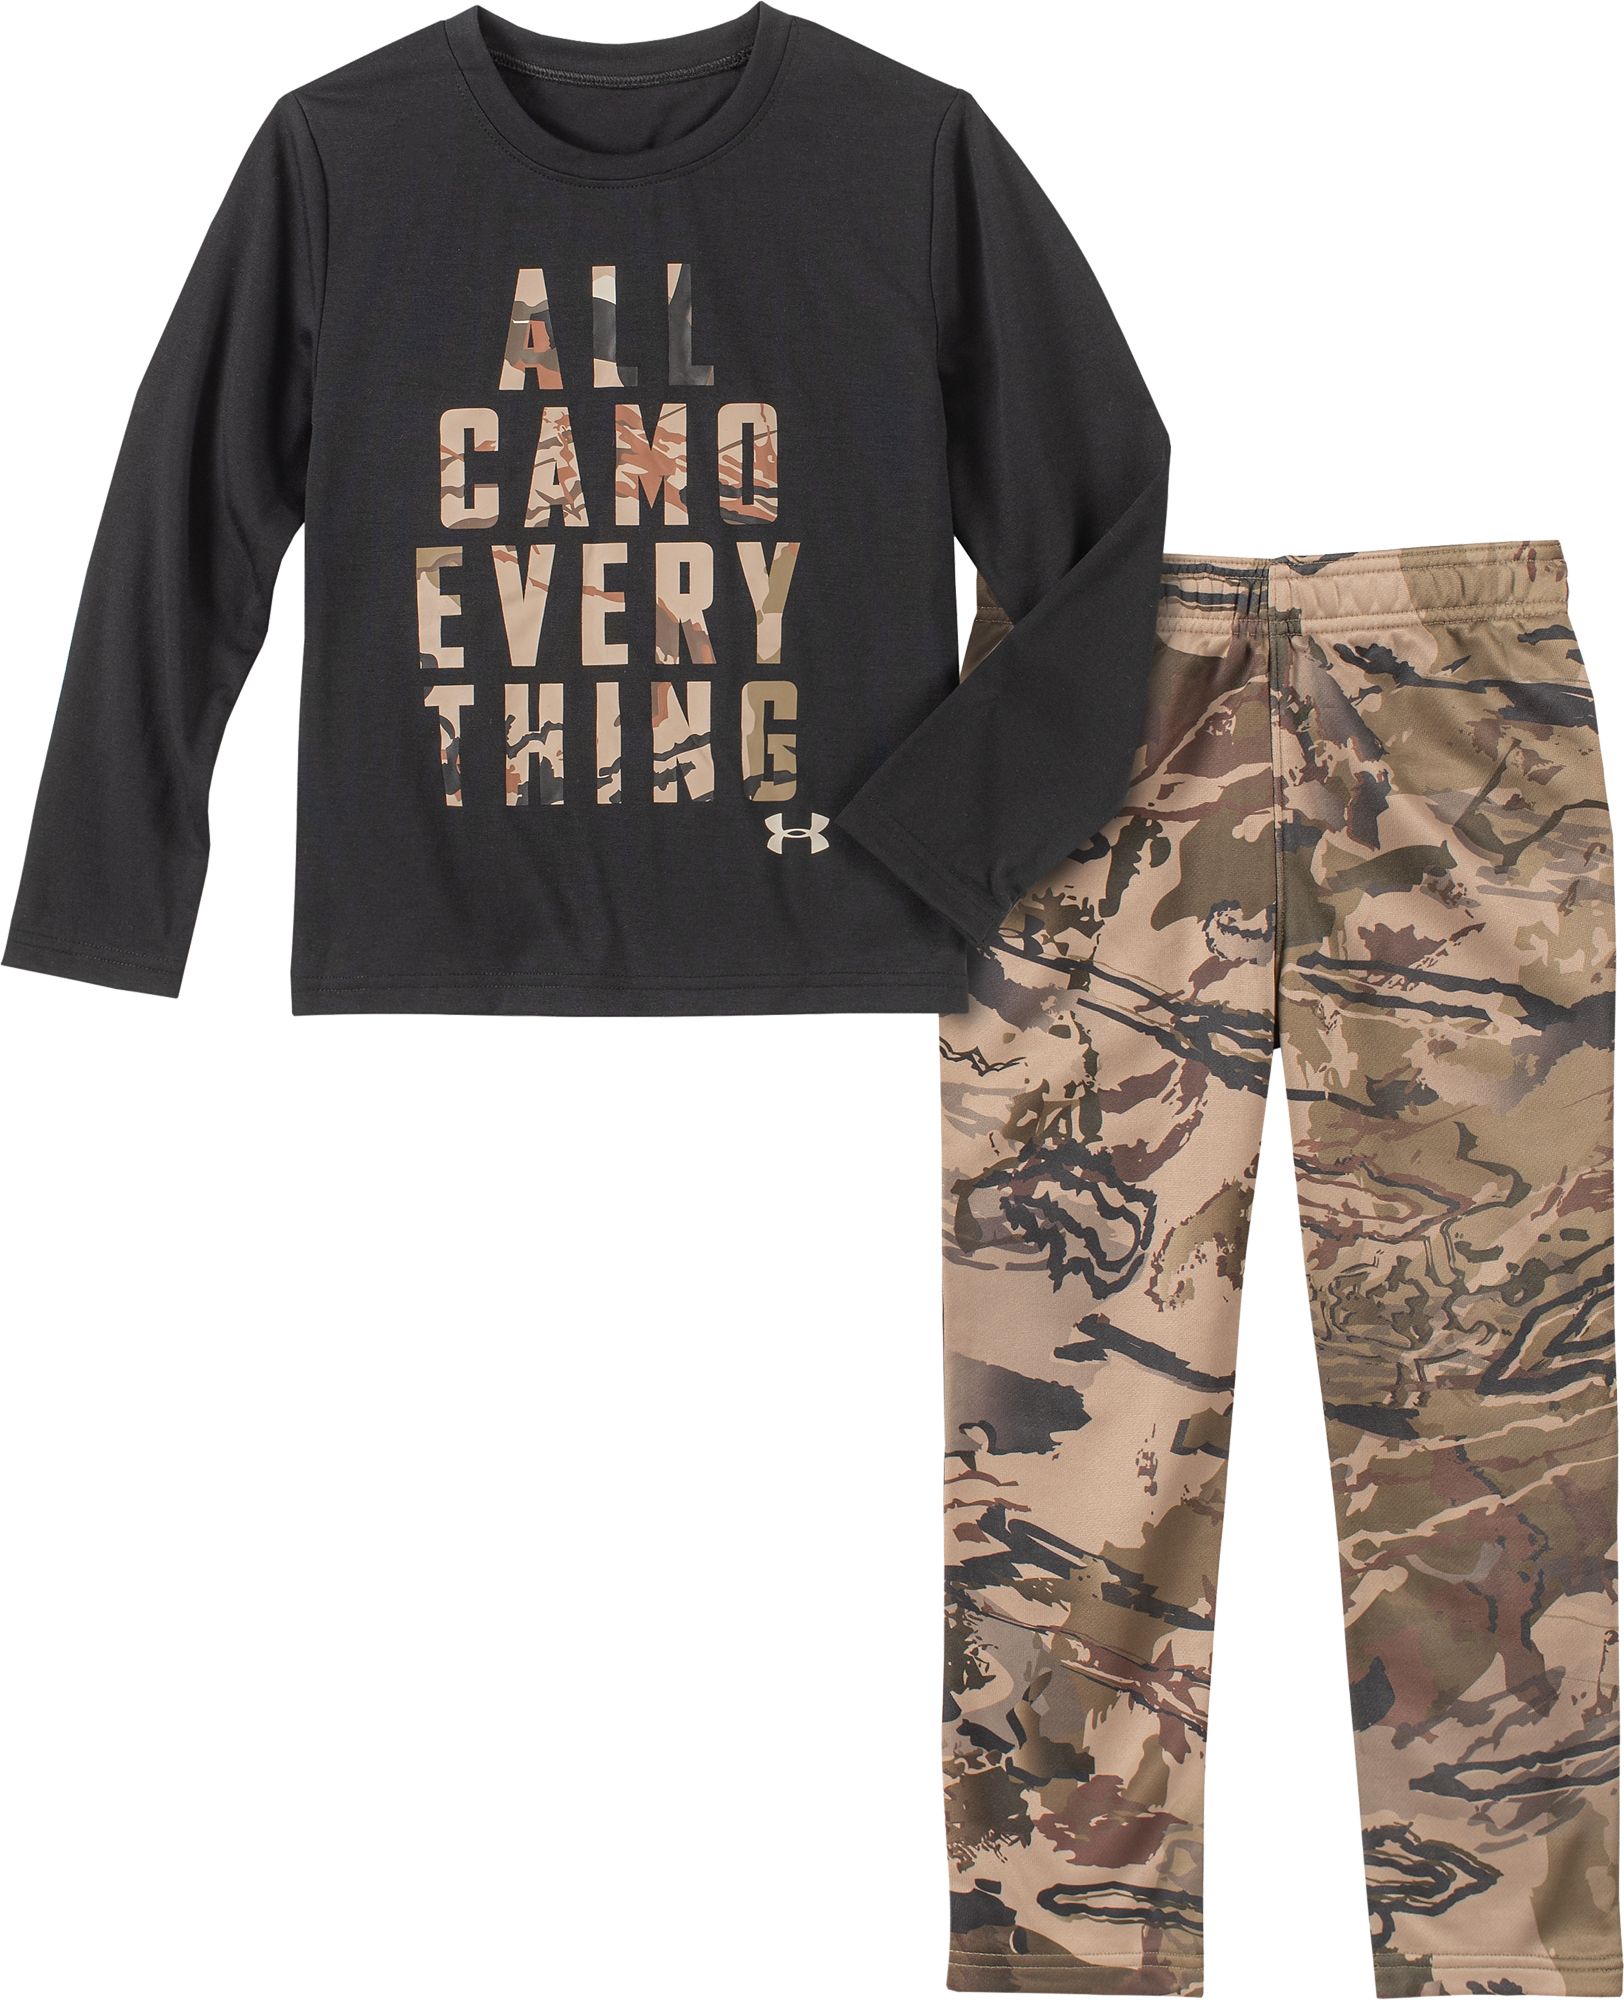 under armour camouflage t shirt